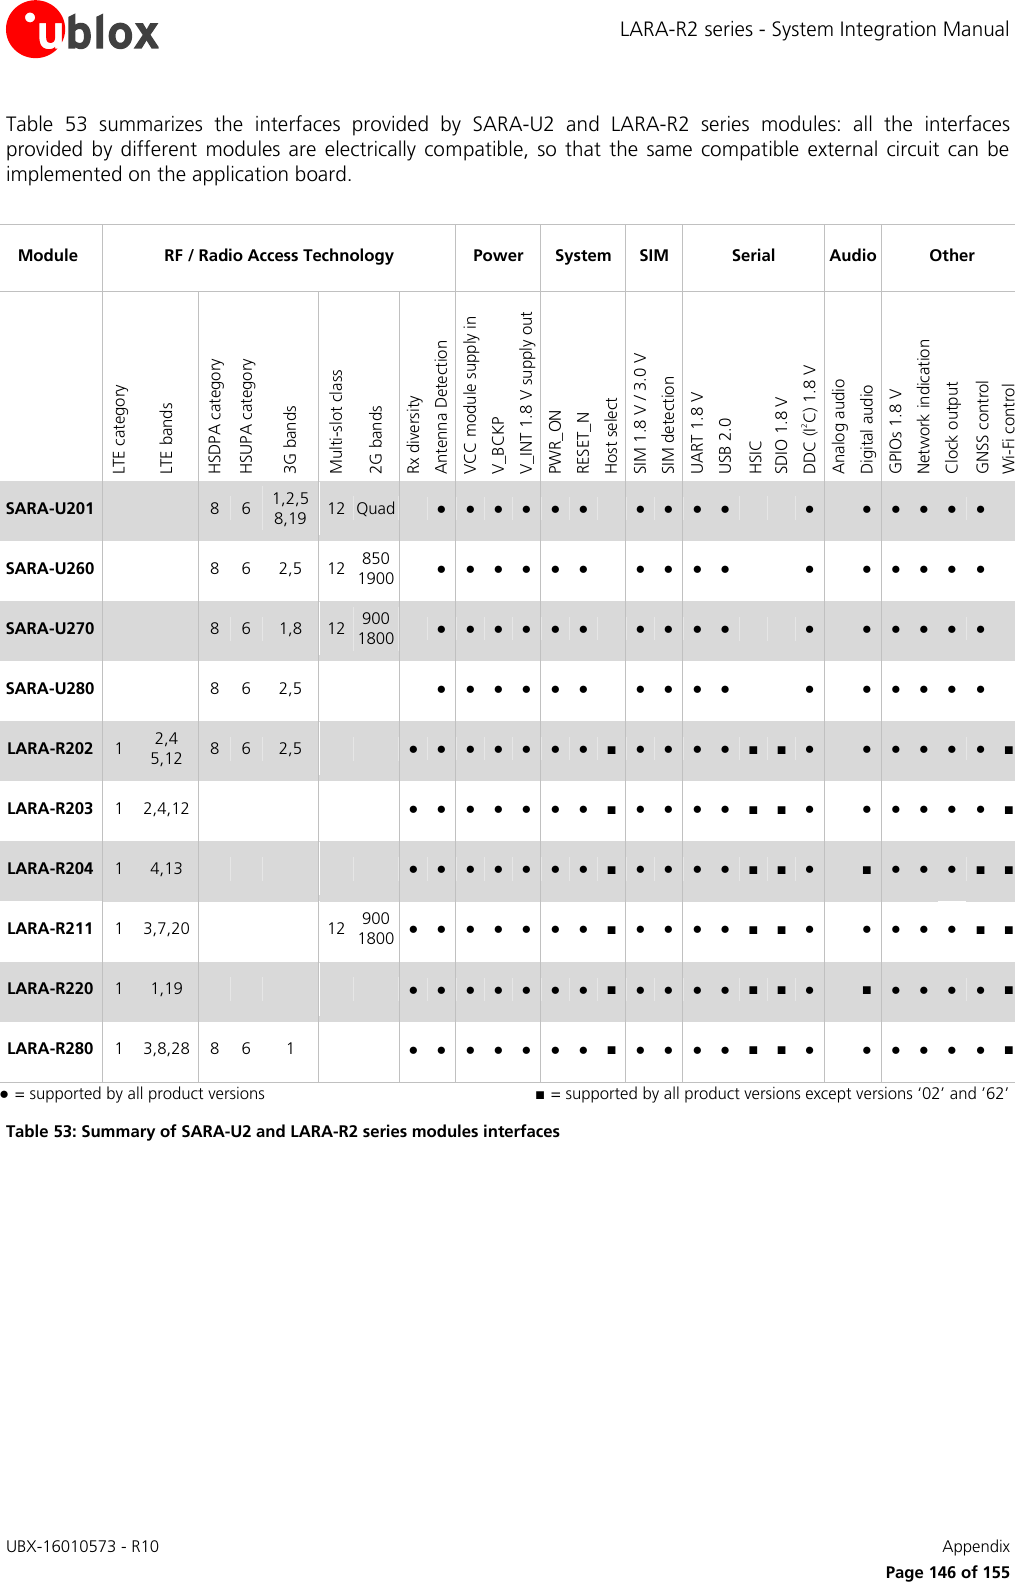 LARA-R2 series - System Integration Manual UBX-16010573 - R10    Appendix      Page 146 of 155 Table  53  summarizes  the  interfaces  provided  by  SARA-U2  and  LARA-R2  series  modules:  all  the  interfaces provided  by different  modules  are  electrically compatible,  so that  the same  compatible  external  circuit  can be implemented on the application board.  Module RF / Radio Access Technology Power System SIM Serial Audio Other  LTE category LTE bands HSDPA category HSUPA category 3G bands Multi-slot class 2G bands Rx diversity Antenna Detection VCC module supply in V_BCKP V_INT 1.8 V supply out PWR_ON RESET_N Host select SIM 1.8 V / 3.0 V SIM detection UART 1.8 V USB 2.0  HSIC SDIO 1.8 V DDC (I2C) 1.8 V Analog audio Digital audio  GPIOs 1.8 V Network indication Clock output GNSS control Wi-Fi control SARA-U201   8 6 1,2,5 8,19 12 Quad  ● ● ● ● ● ●  ● ● ● ●   ●  ● ● ● ● ●  SARA-U260   8 6 2,5 12 850 1900  ● ● ● ● ● ●  ● ● ● ●   ●  ● ● ● ● ●  SARA-U270   8 6 1,8 12 900 1800  ● ● ● ● ● ●  ● ● ● ●   ●  ● ● ● ● ●  SARA-U280   8 6 2,5    ● ● ● ● ● ●  ● ● ● ●   ●  ● ● ● ● ●  LARA-R202 1 2,4 5,12 8 6 2,5   ● ● ● ● ● ● ● ■ ● ● ● ● ■ ■ ●  ● ● ● ● ● ■ LARA-R203 1 2,4,12      ● ● ● ● ● ● ● ■ ● ● ● ● ■ ■ ●  ● ● ● ● ● ■ LARA-R204 1 4,13      ● ● ● ● ● ● ● ■ ● ● ● ● ■ ■ ●  ■ ● ● ● ■ ■ LARA-R211 1 3,7,20    12 900 1800 ● ● ● ● ● ● ● ■ ● ● ● ● ■ ■ ●  ● ● ● ● ■ ■ LARA-R220 1 1,19      ● ● ● ● ● ● ● ■ ● ● ● ● ■ ■ ●  ■ ● ● ● ● ■ LARA-R280 1 3,8,28 8 6 1   ● ● ● ● ● ● ● ■ ● ● ● ● ■ ■ ●  ● ● ● ● ● ■ ●  = supported by all product versions    ■  = supported by all product versions except versions ‘02’ and ’62’ Table 53: Summary of SARA-U2 and LARA-R2 series modules interfaces  